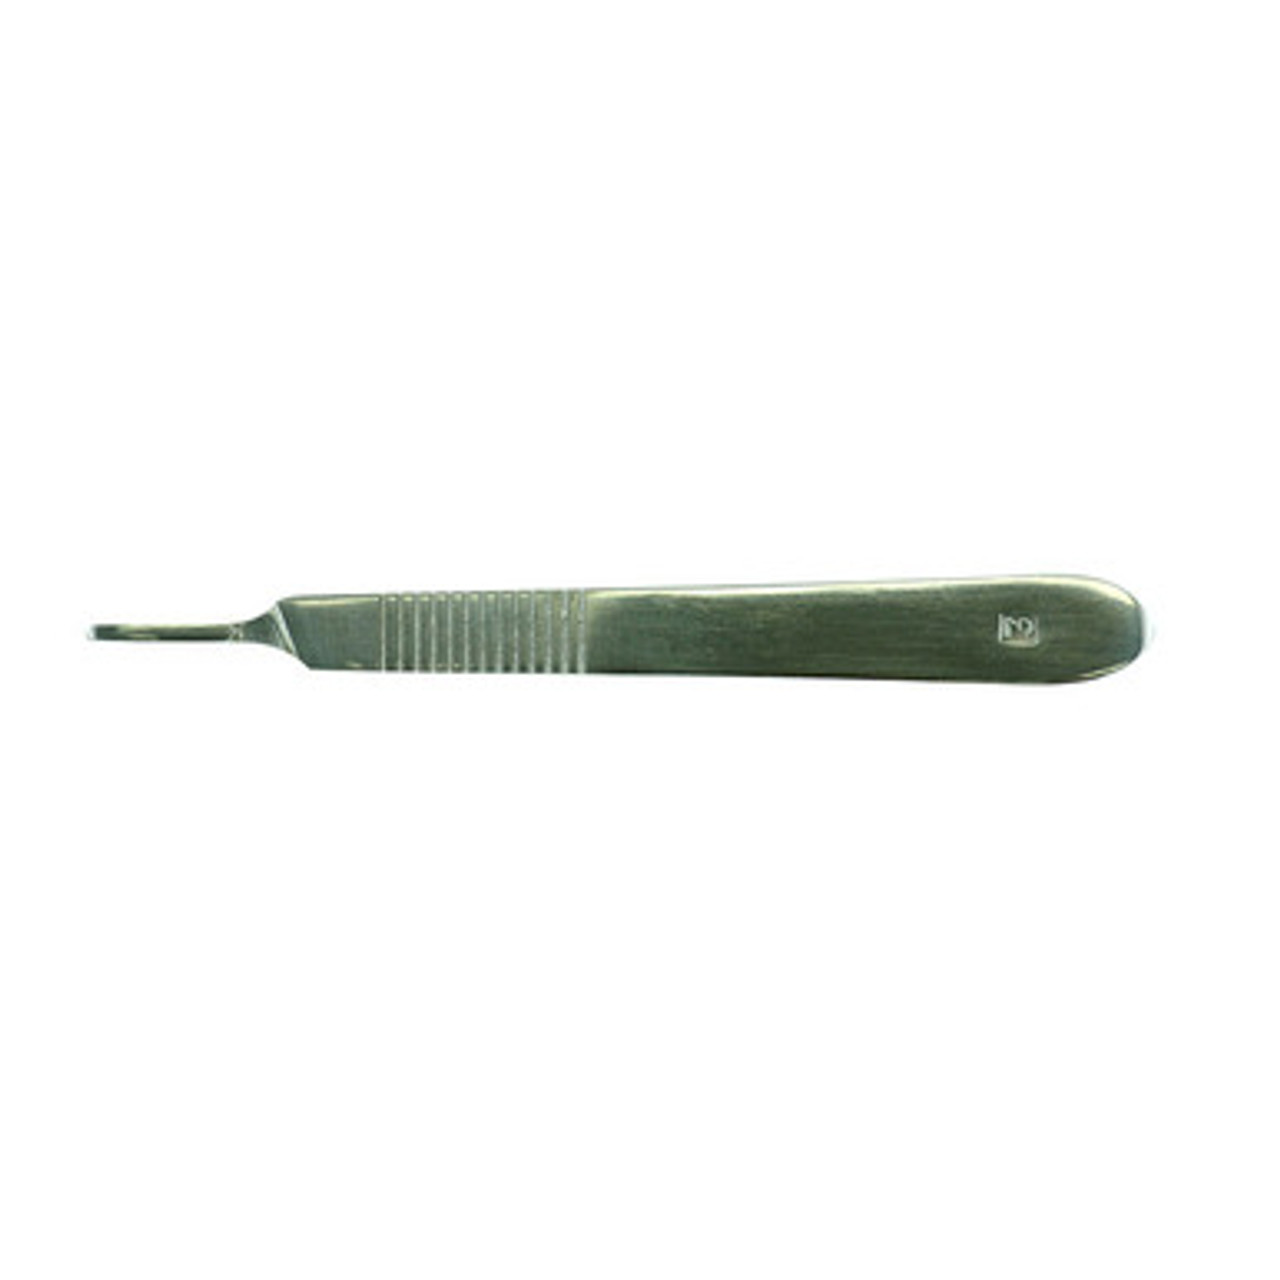 Sterling-Sterling No 3 Stainless Steel Scalpel handle.